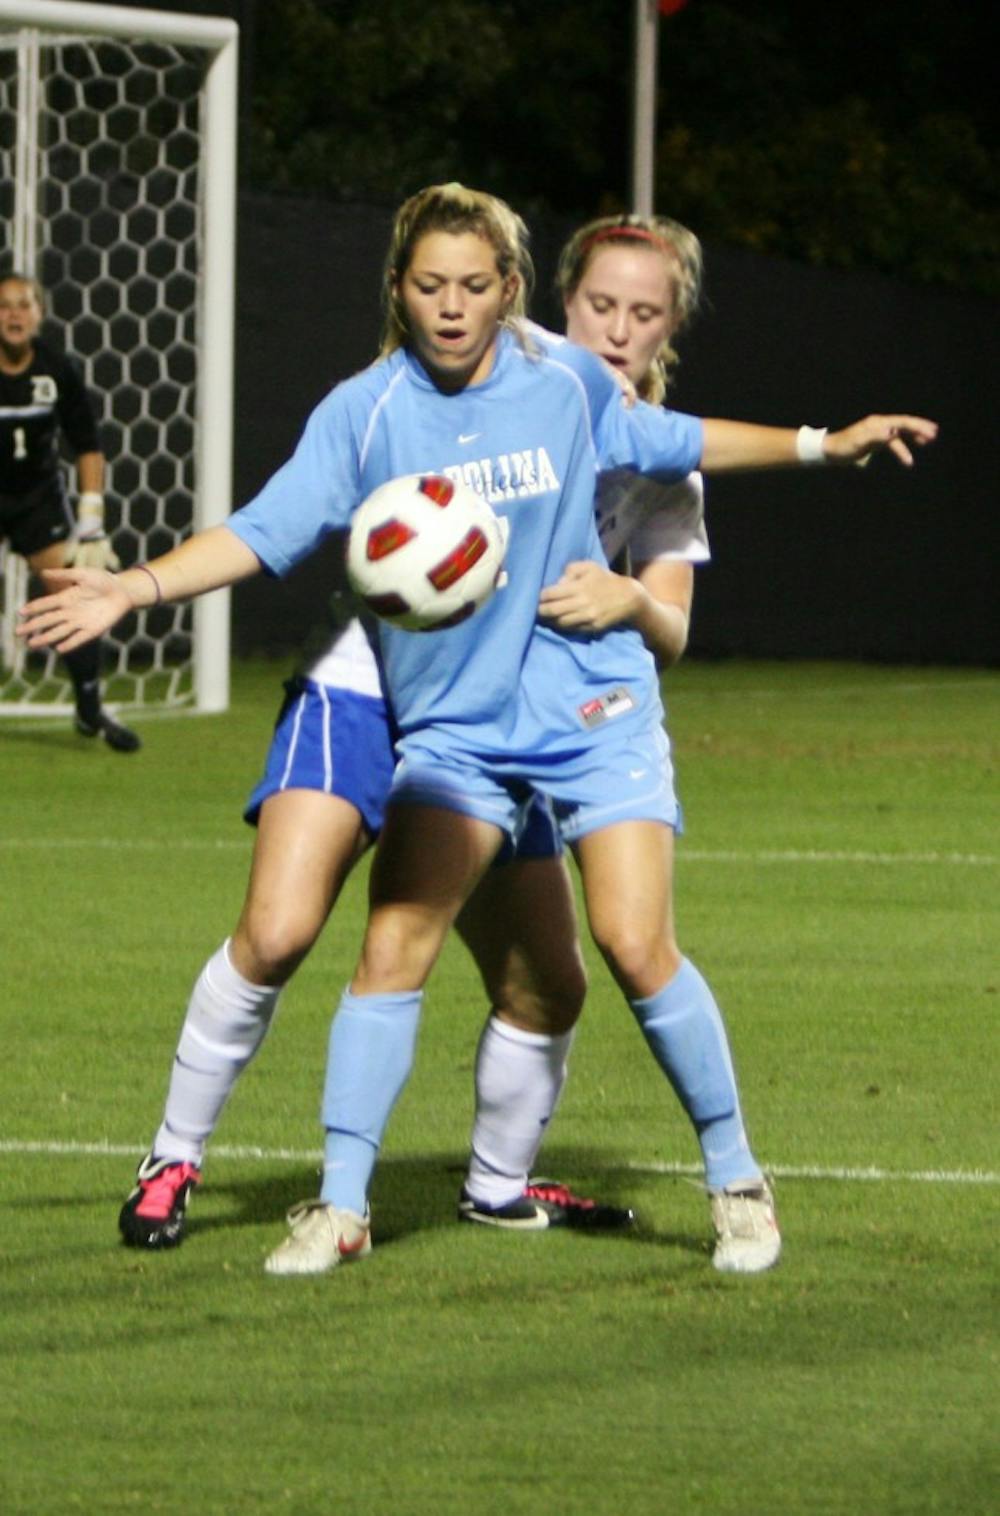 Kealia Ohai squares up in front of a defender in UNC’s 5-3 win against Duke on Thursday. Ohai scored her 12th goal of the season in the win.